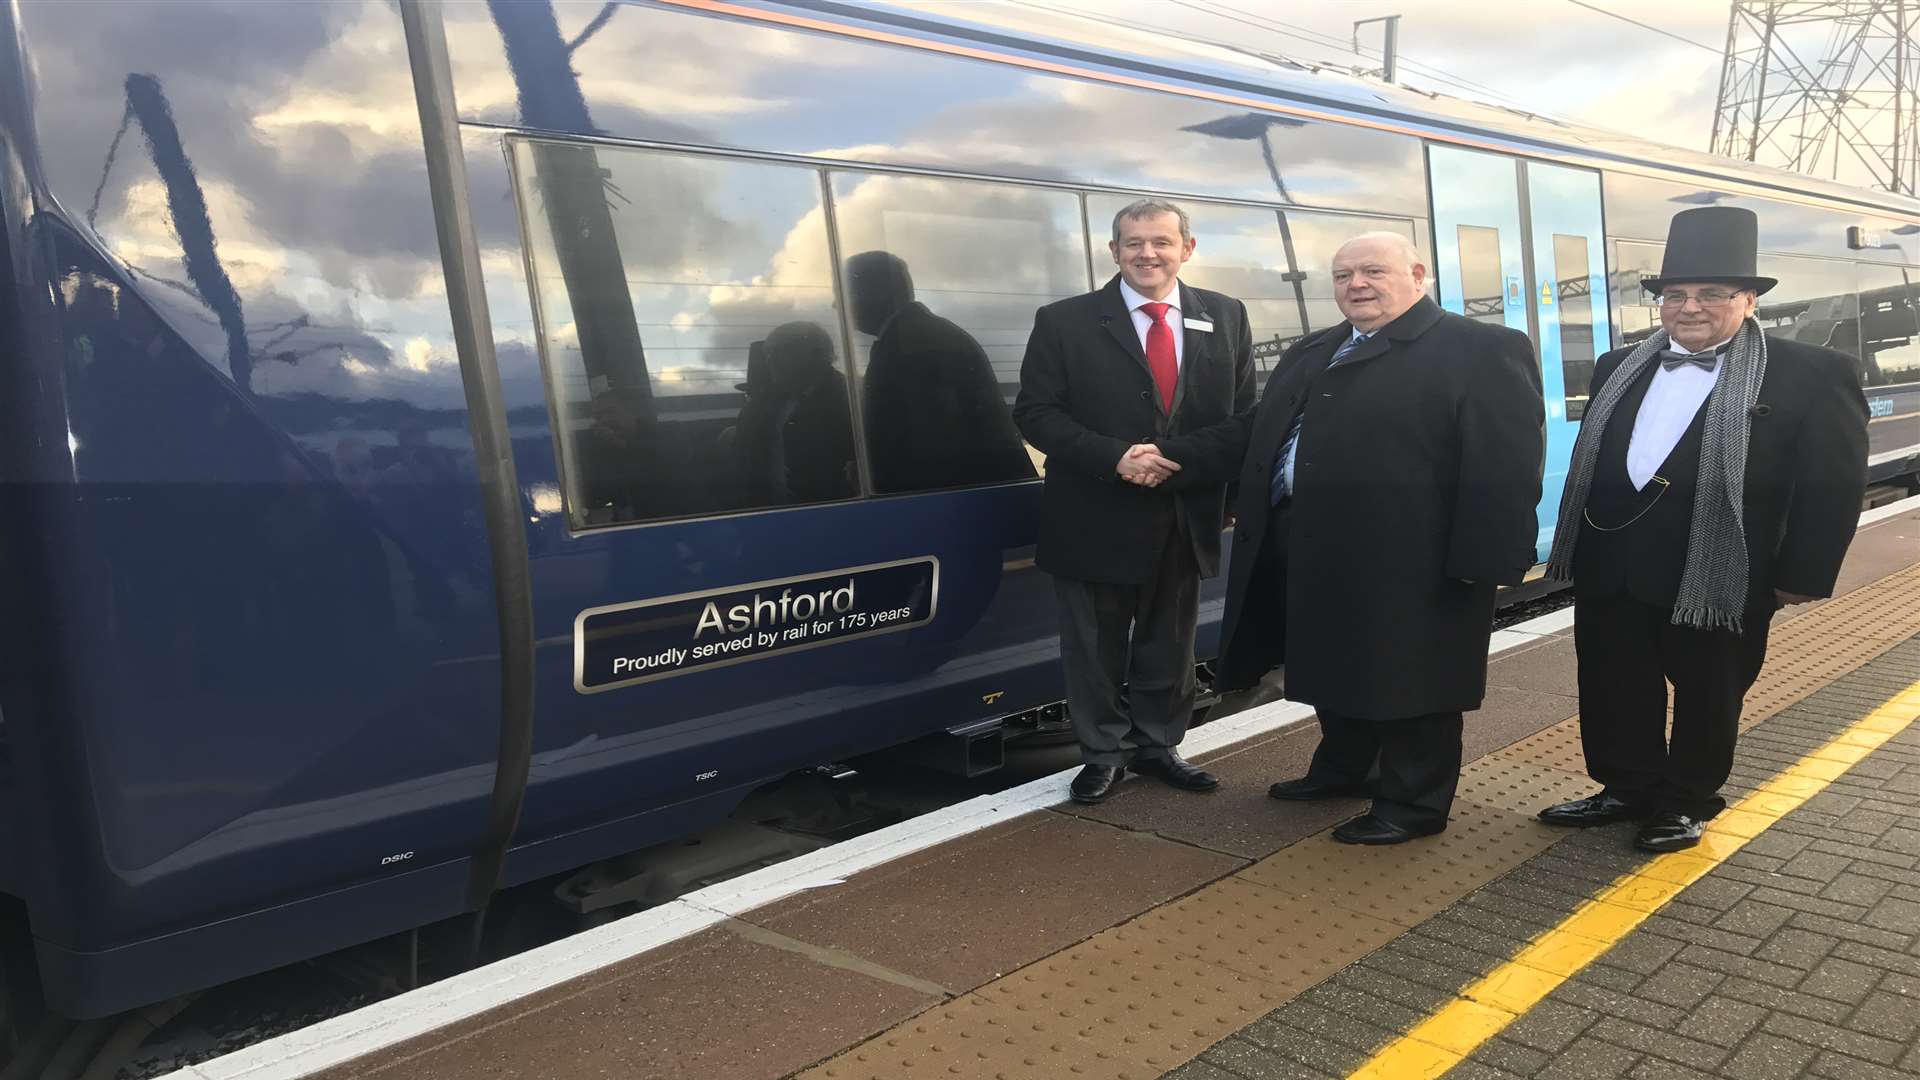 David Wornham, Cllr Gerry Clarkson and Jim Wells unveiled the specially named train.